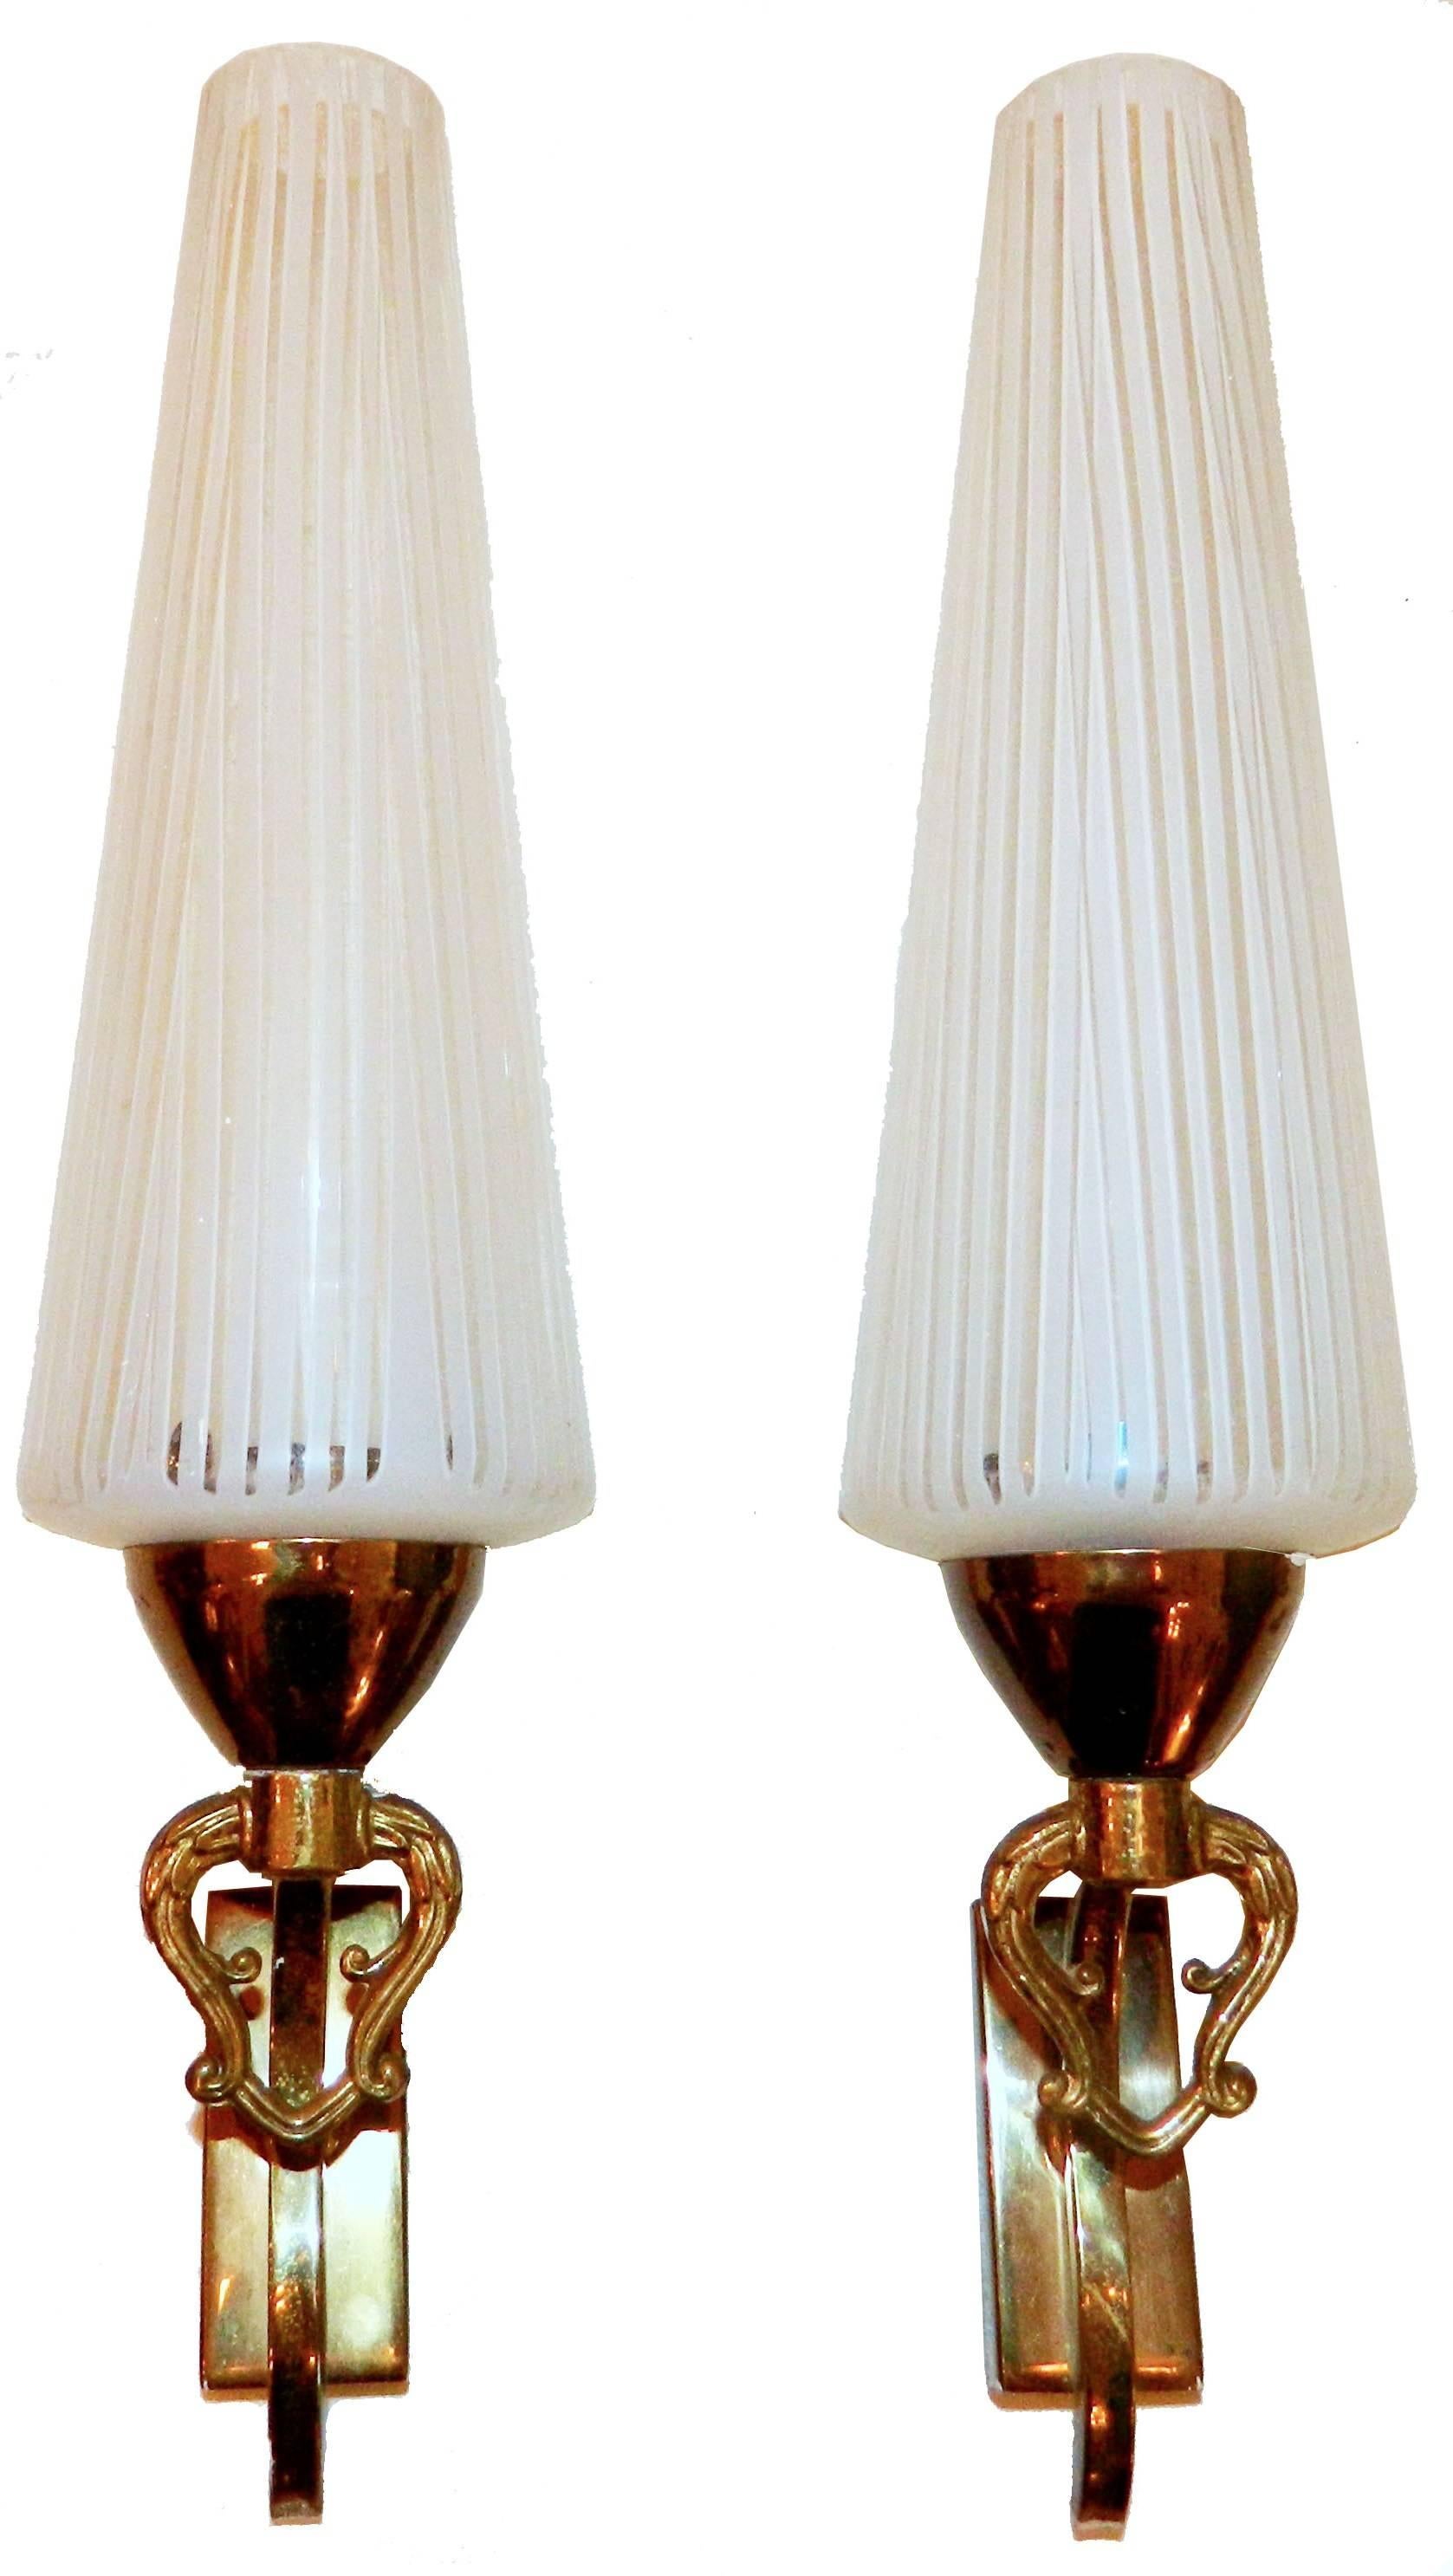 Pair of neoclassical Maison Lunel French wall sconces with original white opaline shade, circa 1950s.
Projection to the wall :6